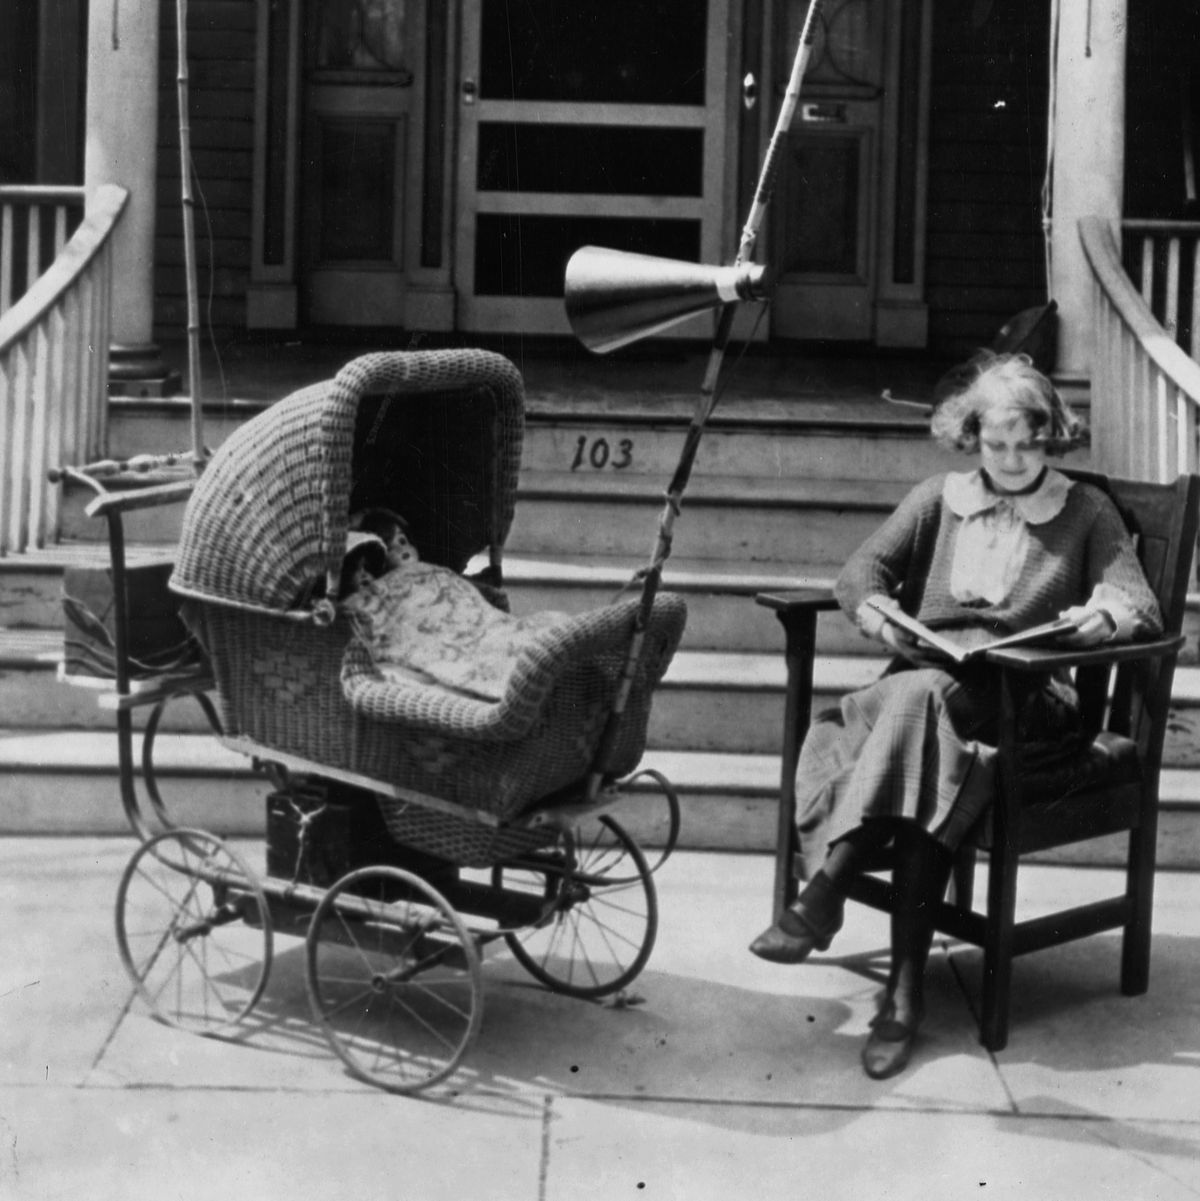 Product, Photograph, Baby carriage, Baby Products, Sitting, Snapshot, Monochrome, Black-and-white, Chair, Furniture, 